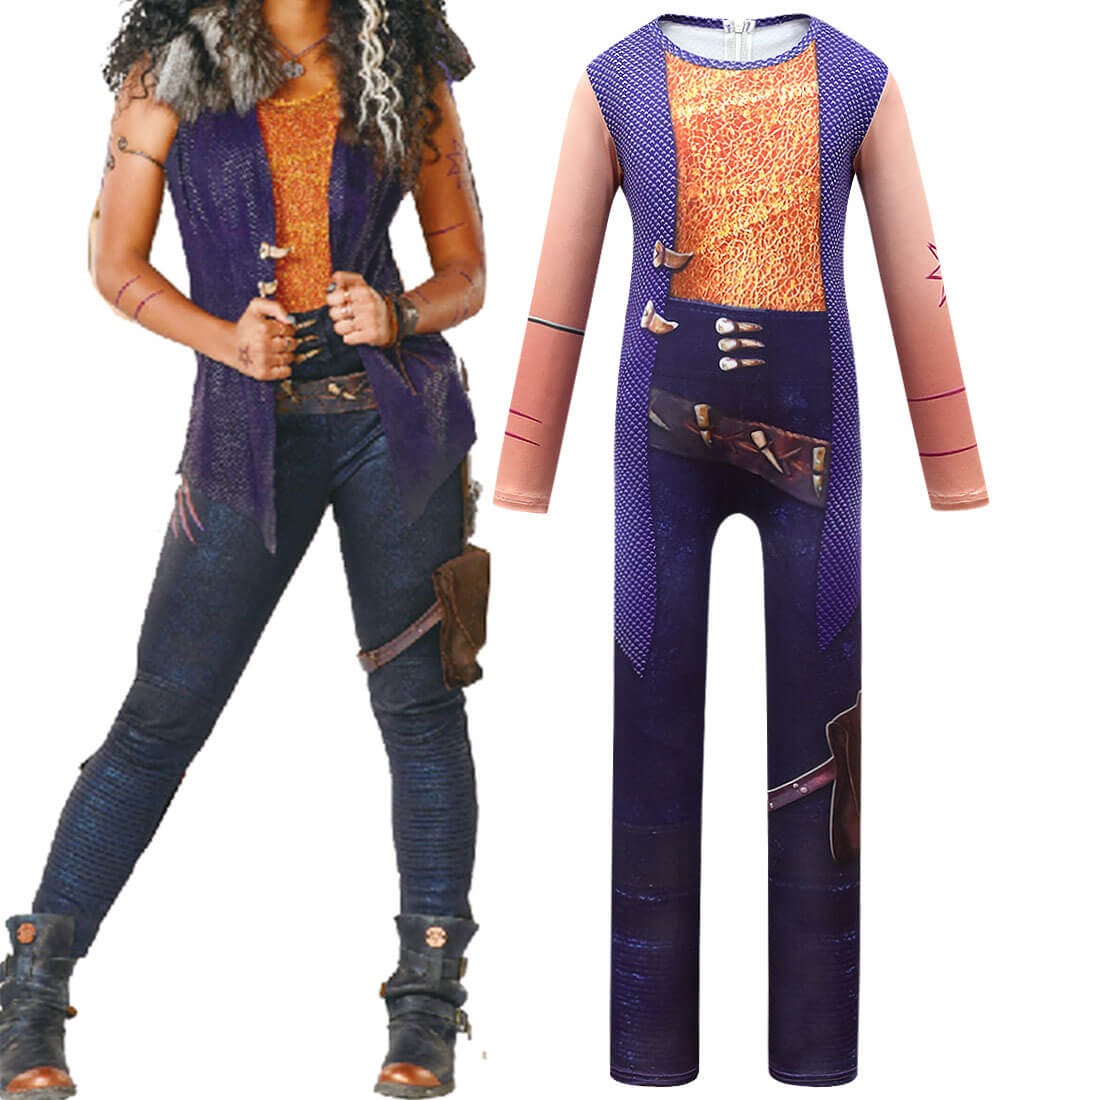 Kids Werewolf Willa Costume Zombies Fancy Cosplay Jumpsuit for Boys and Girls